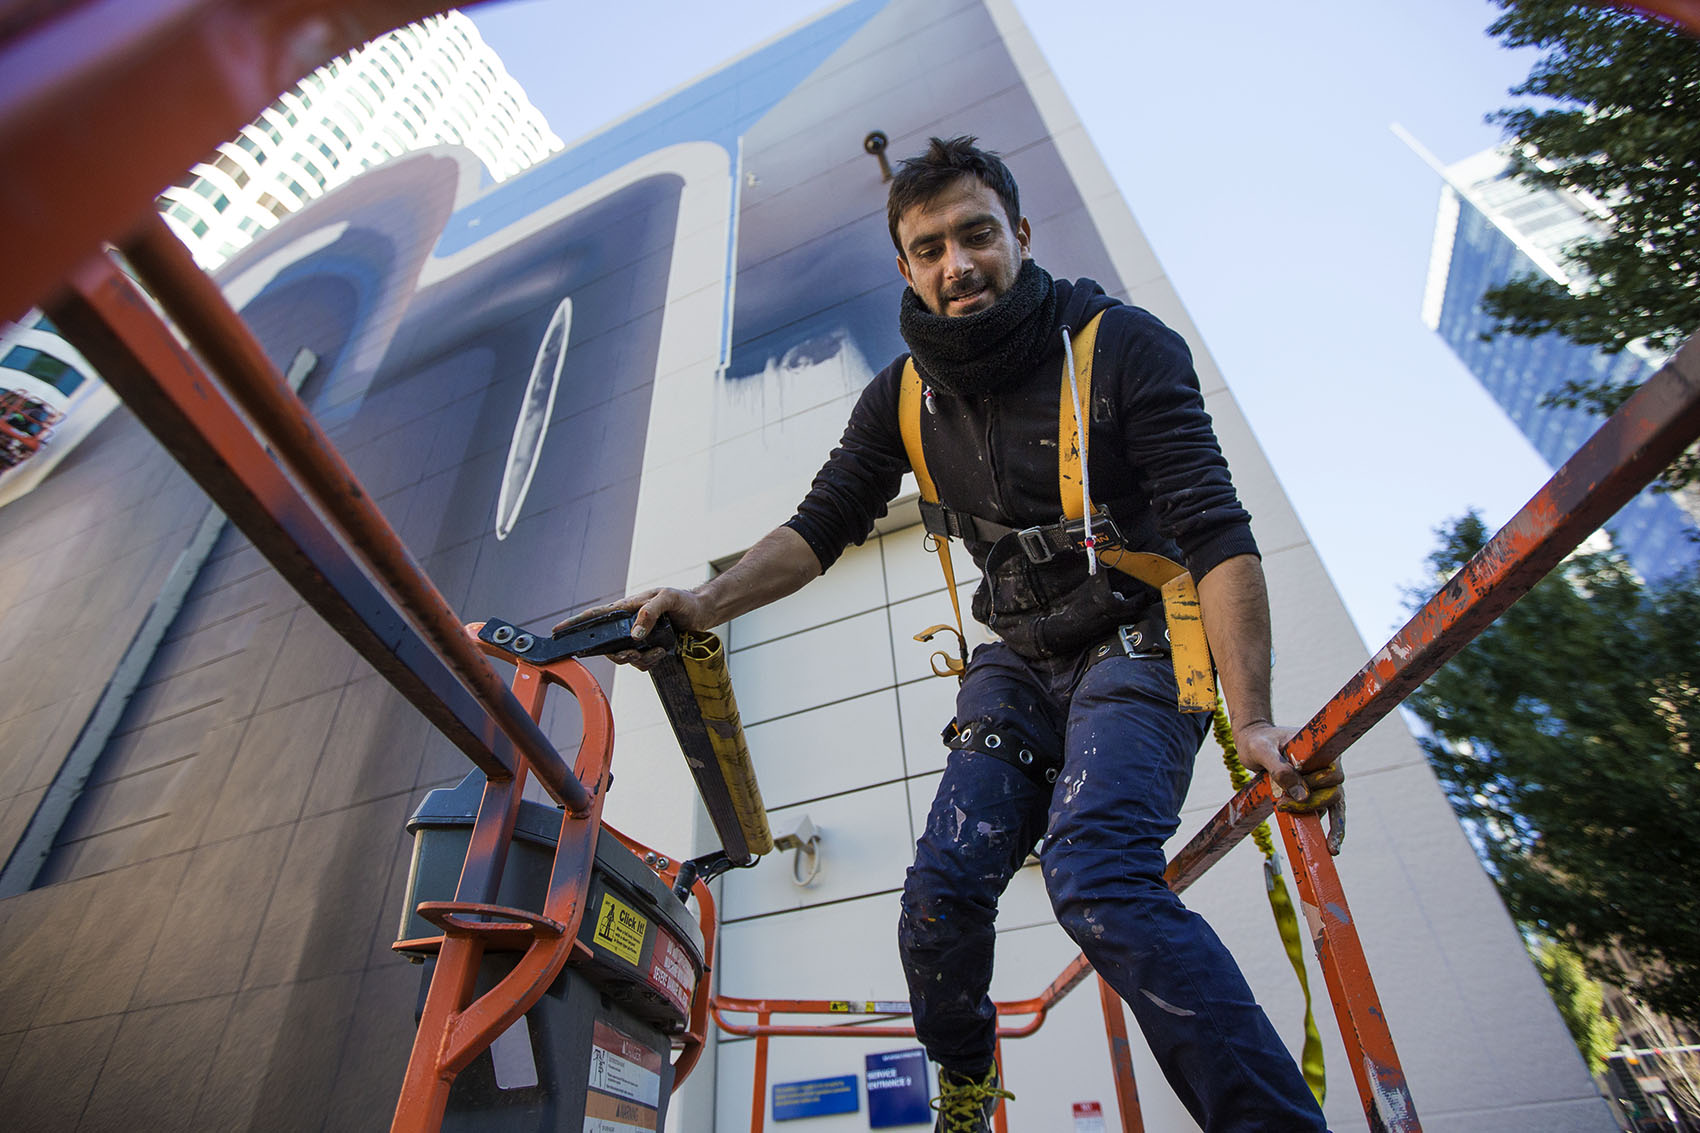 Iranian artist Mehdi Ghadyanloo climbs into a cherry picker as he works on the latest mural to go up on the Rose Kennedy Greenway in Dewey Square. (Jesse Costa/WBUR)